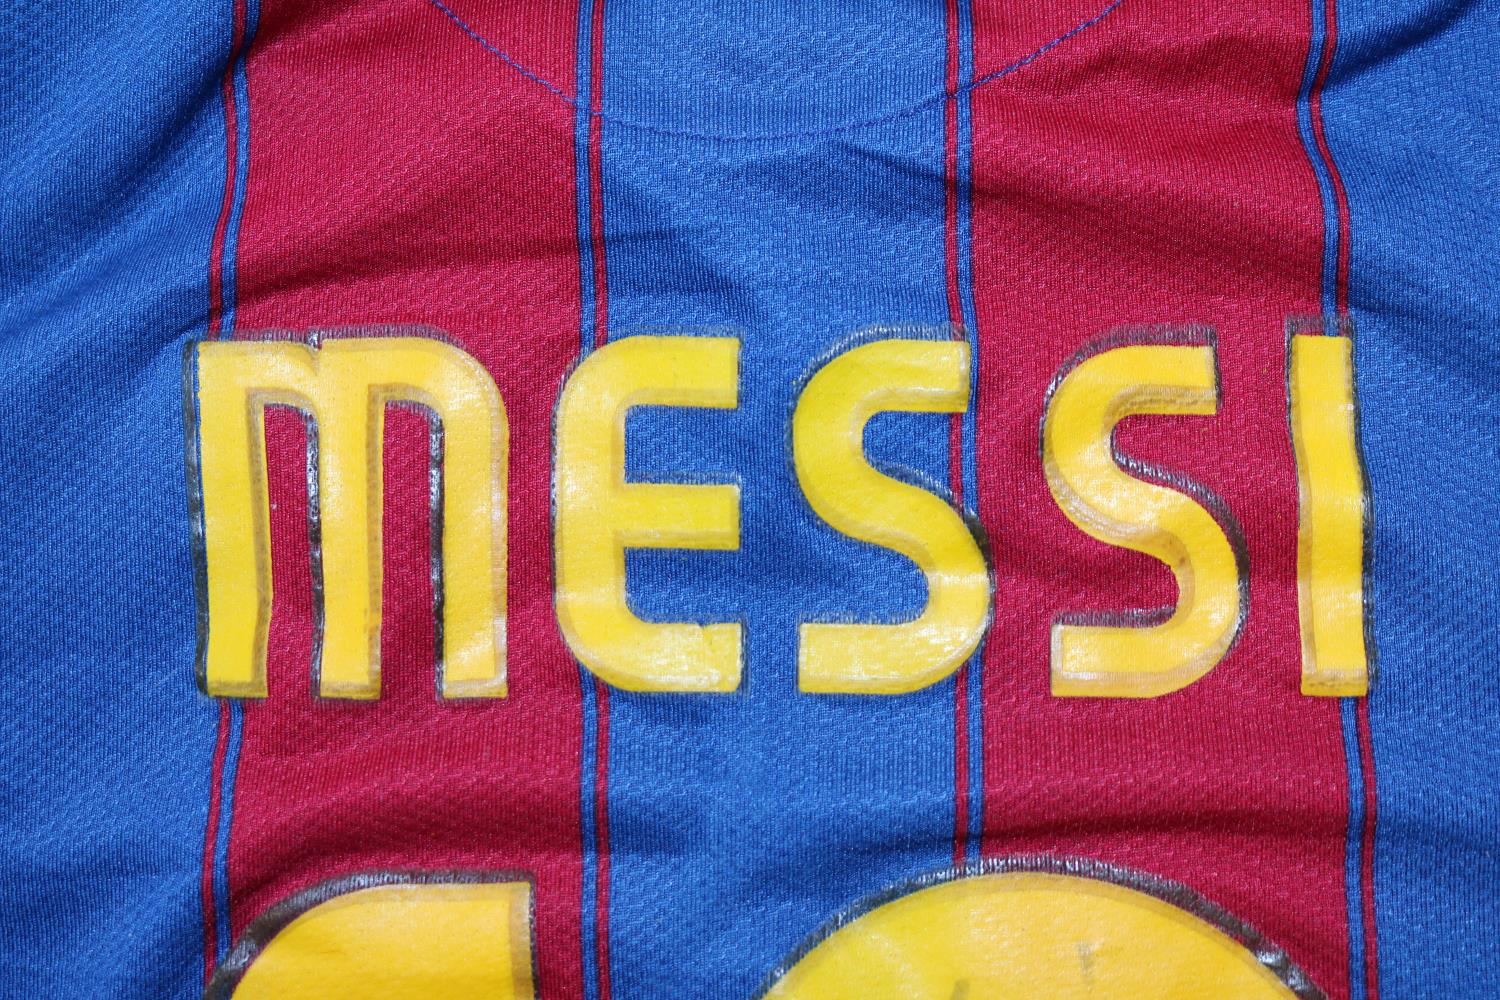 LIONEL MESSI 2009/2010 SIGNED BARCELONA #10 JERSEY The jersey is accompanied by a letter of - Image 9 of 10